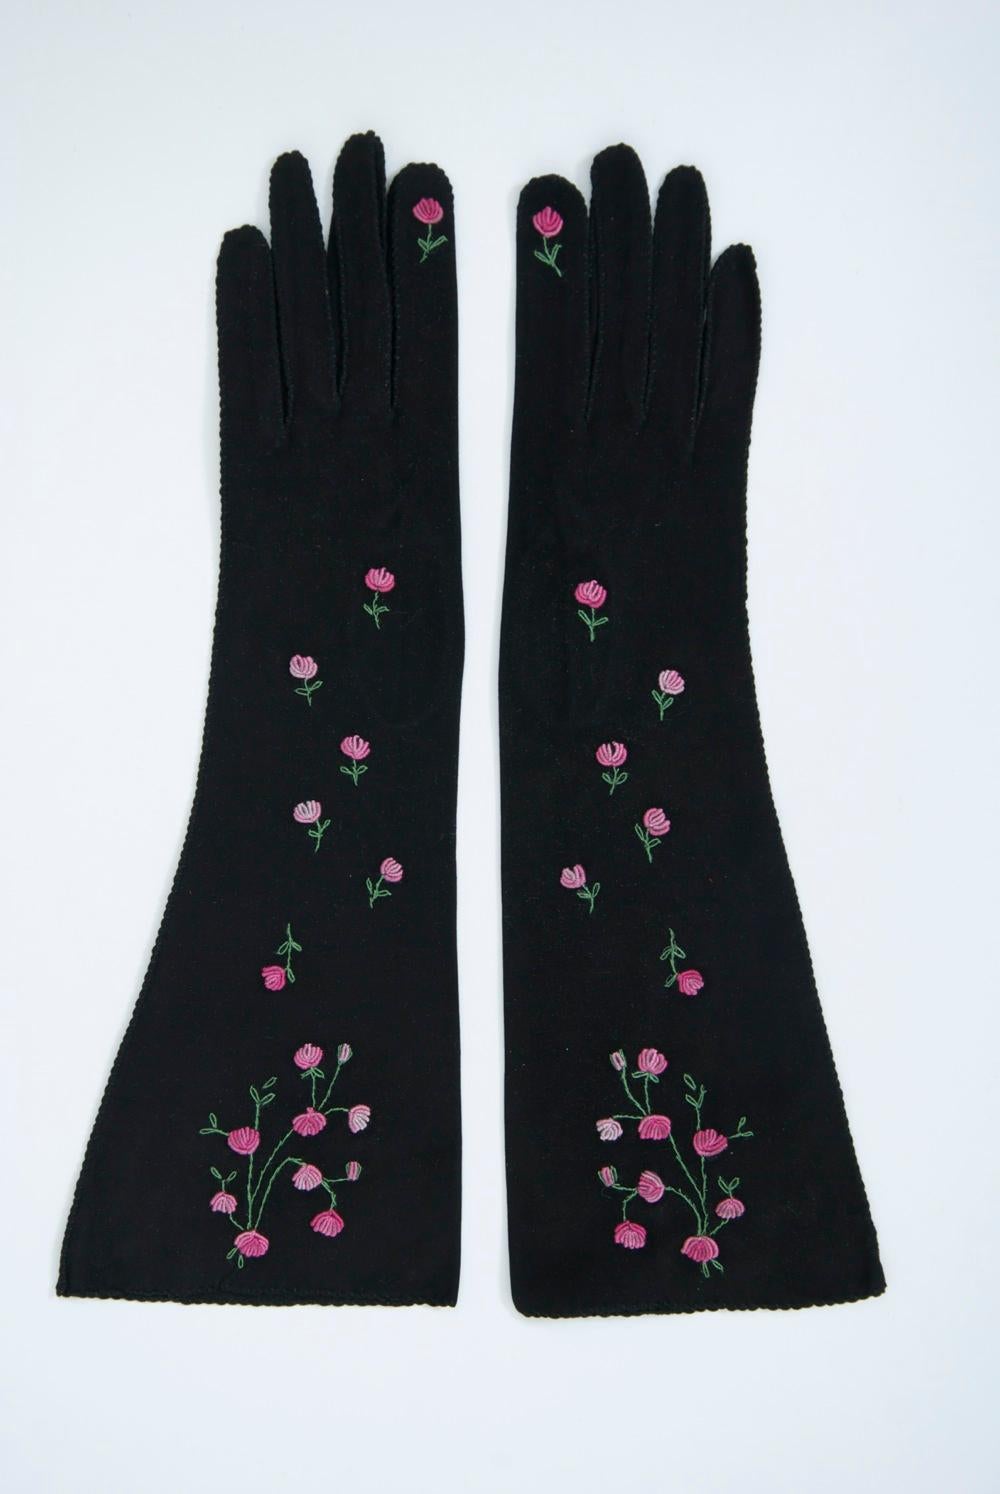 Mid-length gloves in black suede adorned with ombre pink embroidered flowers on the top and single flowers on the second and pinkie fingers. 1950s-'60s. Approximate size 7.